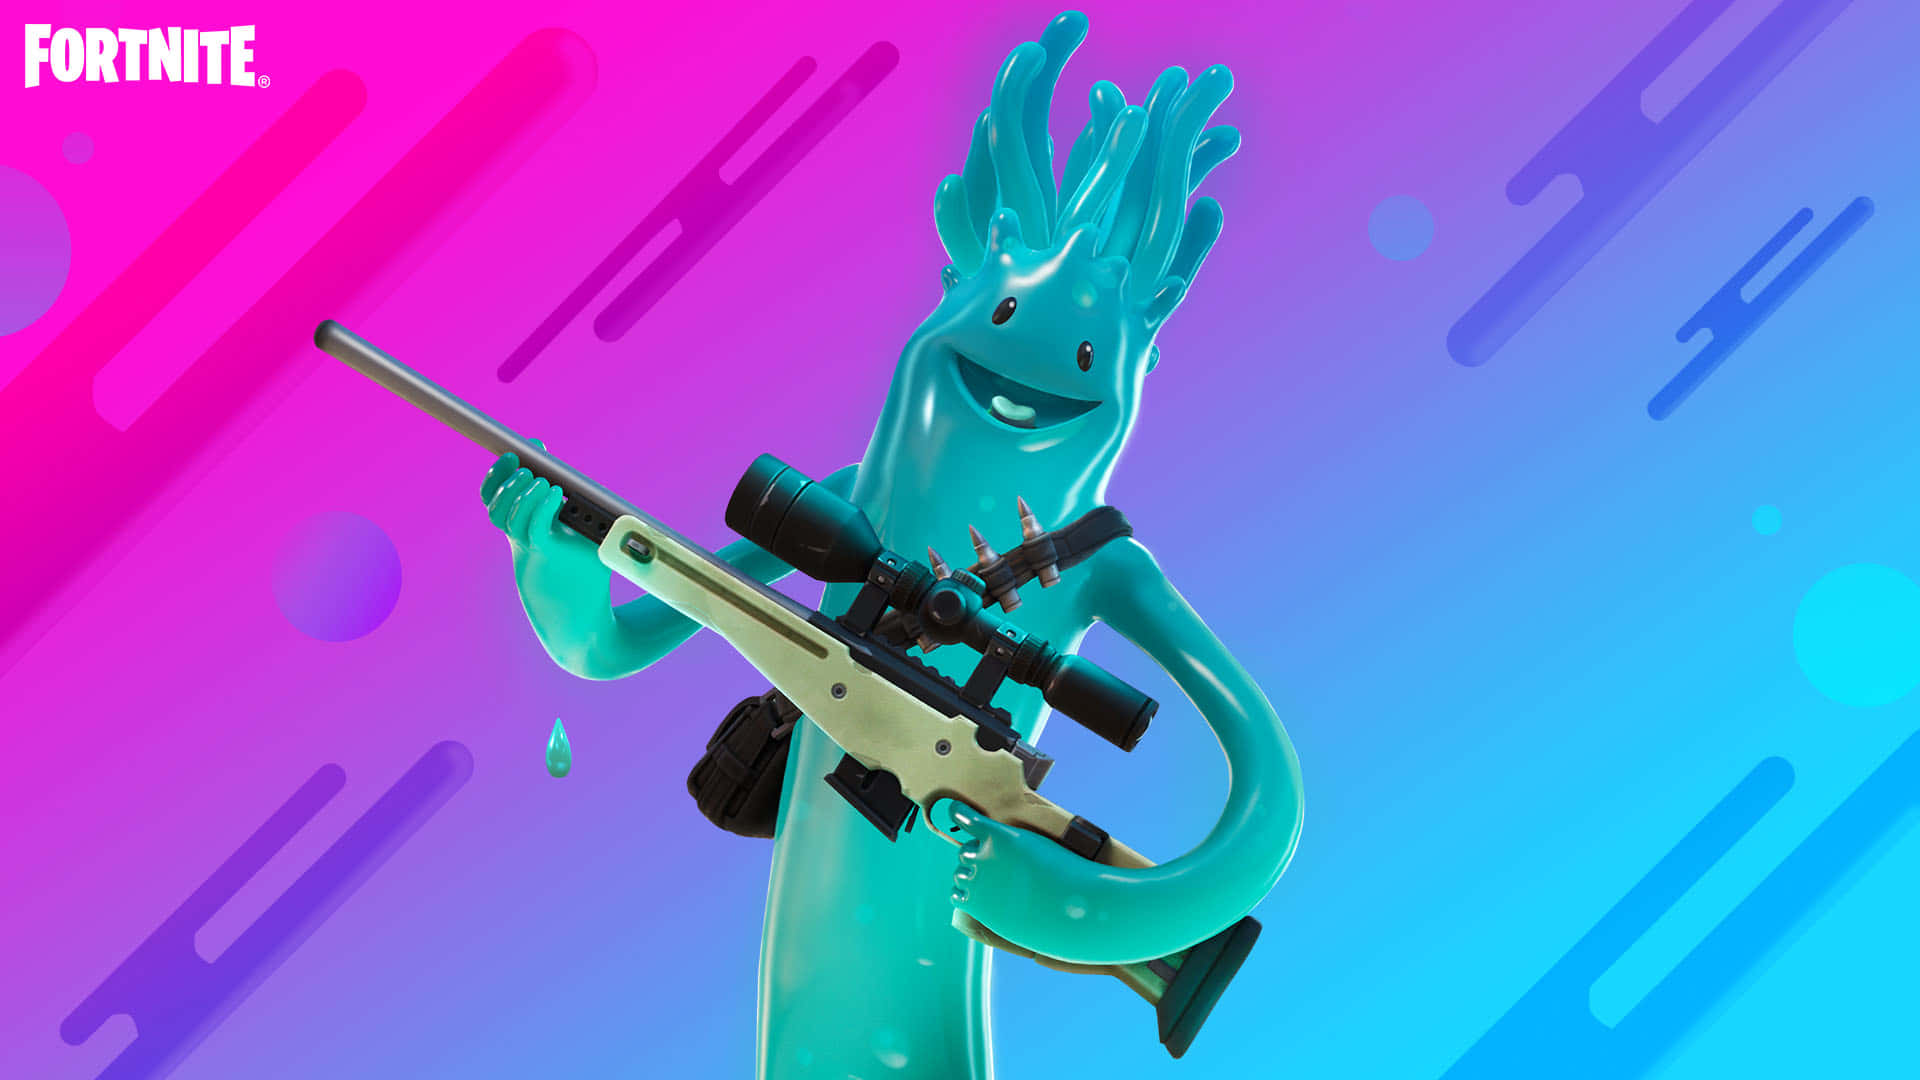 "Be cool while playing Fortnite!"